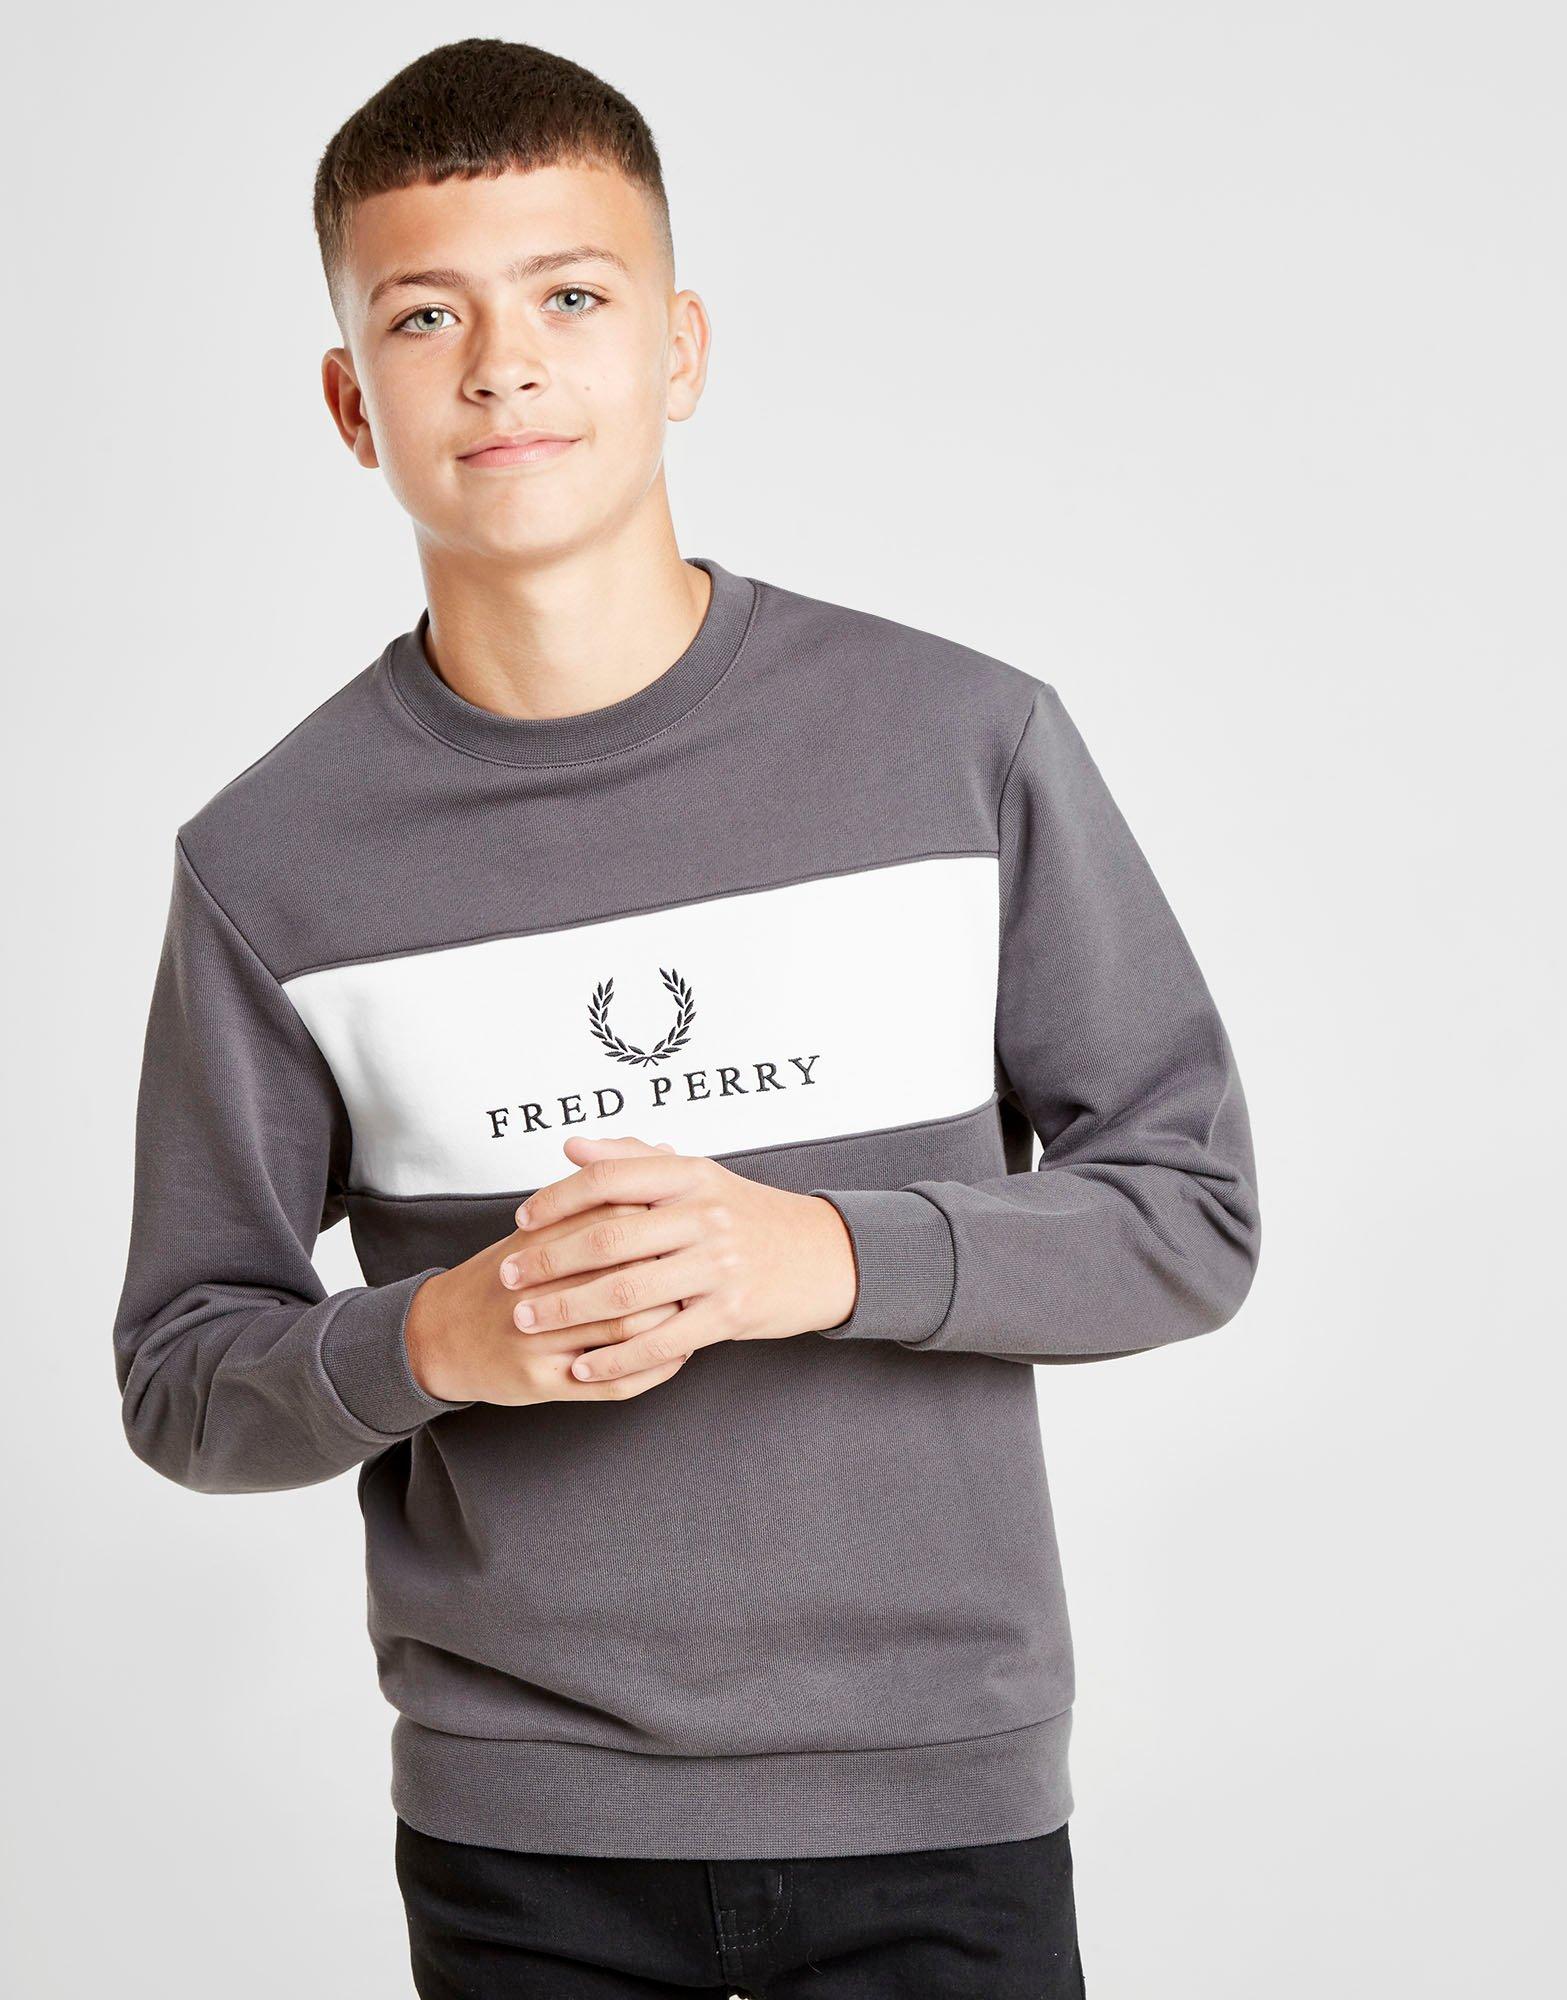 fred perry sweatshirts